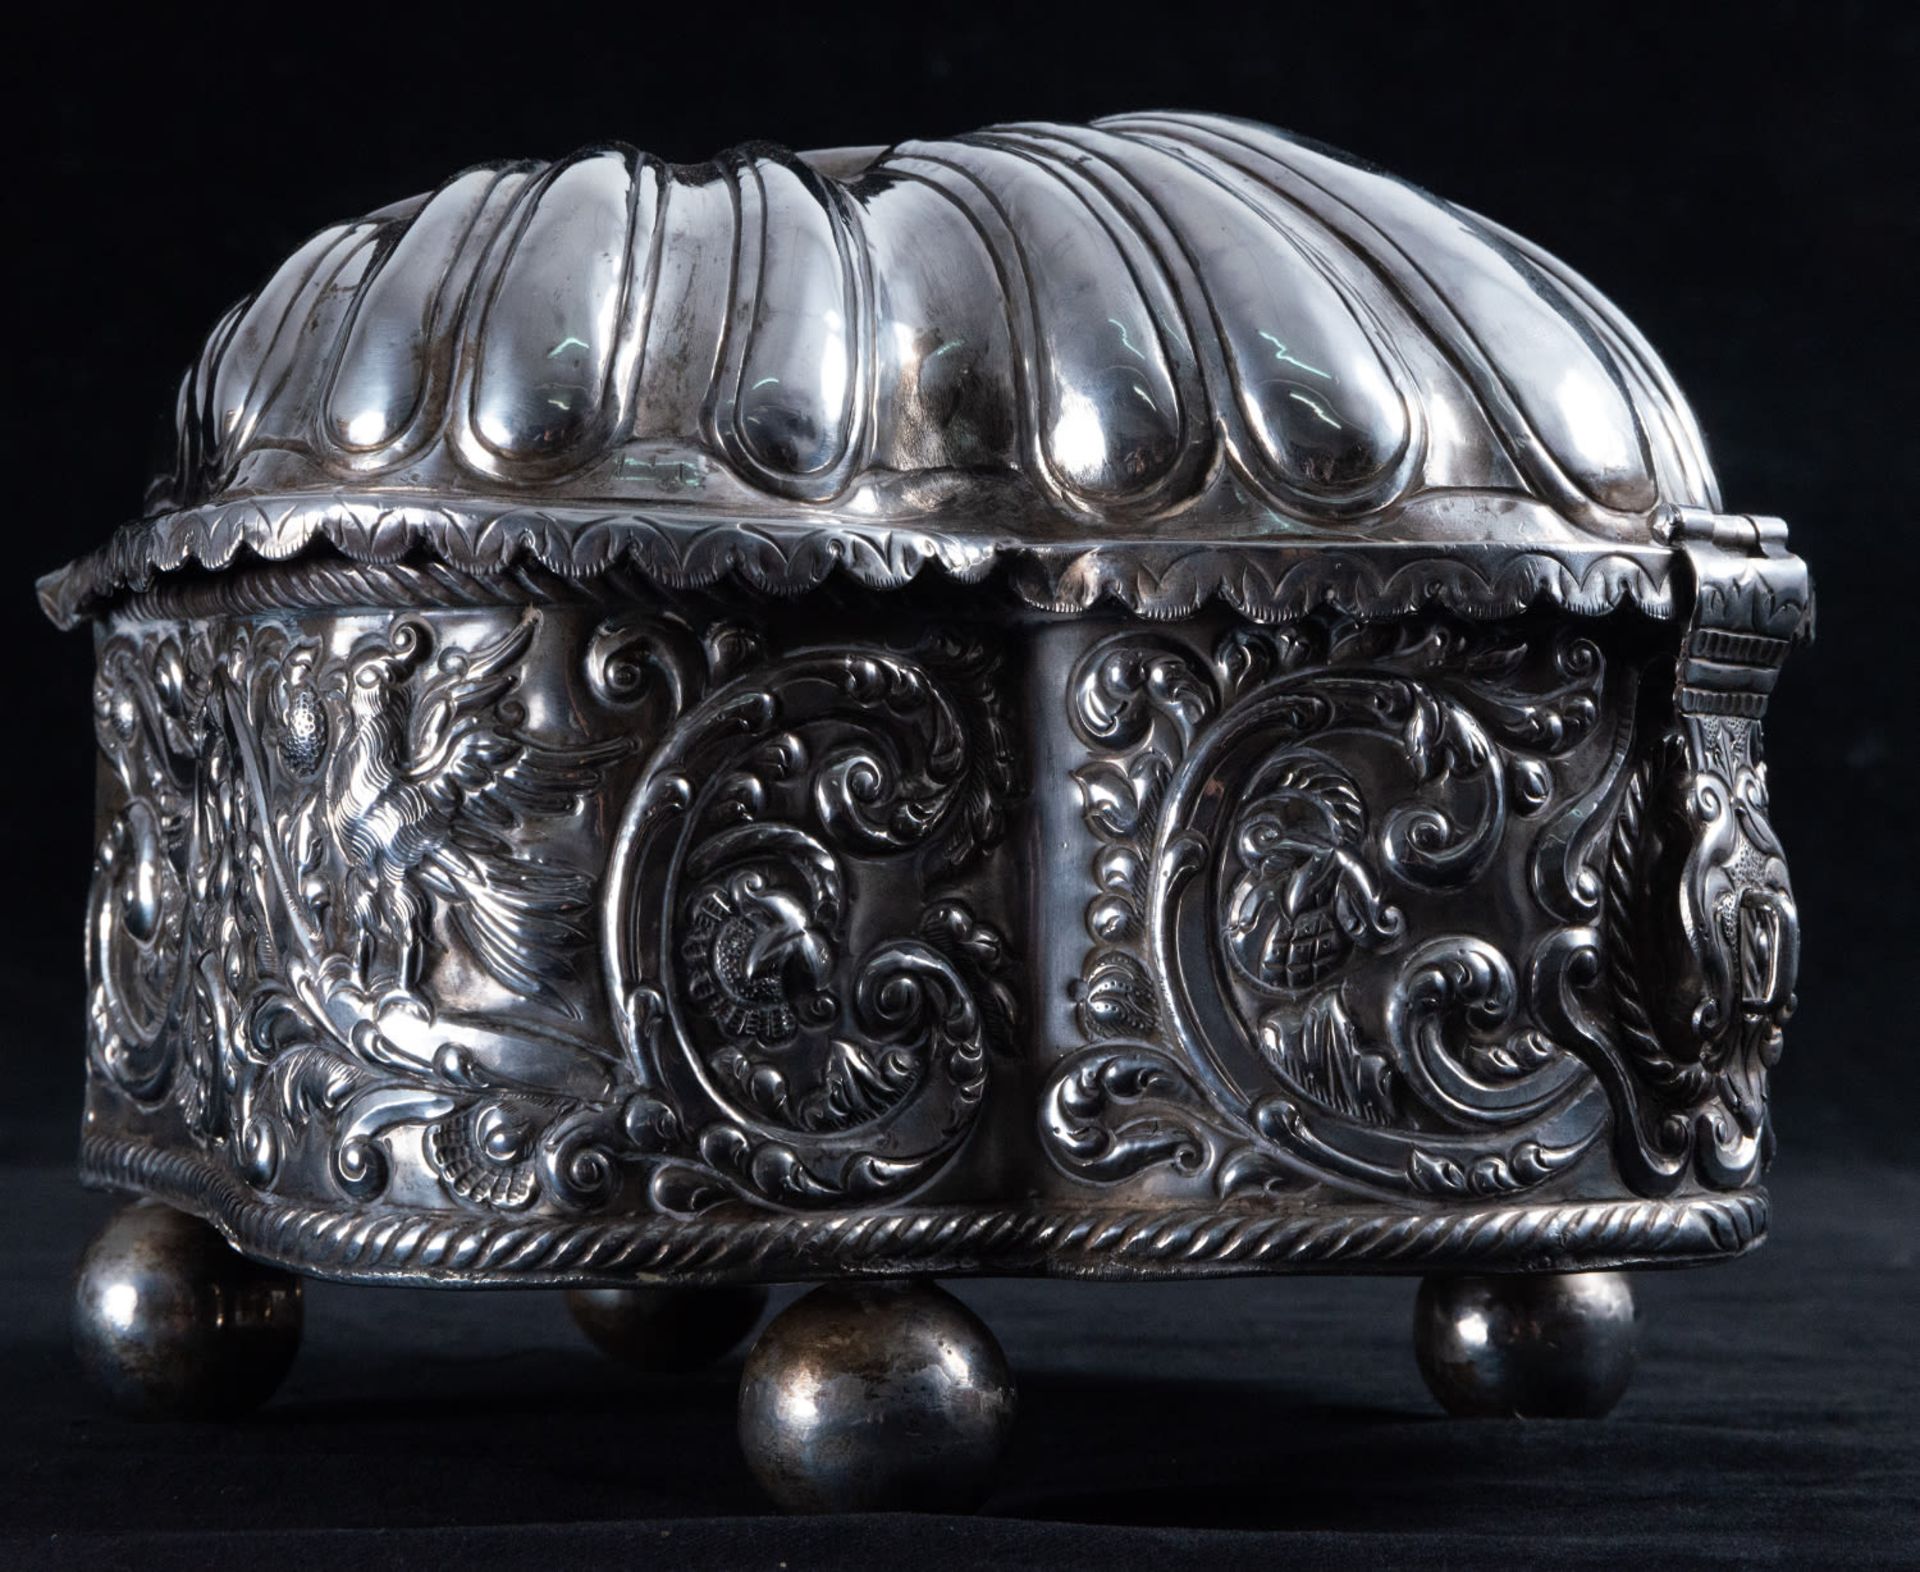 Exceptional Coquera in silver, colonial work, Cuzco, Peru, 18th century - Image 5 of 8